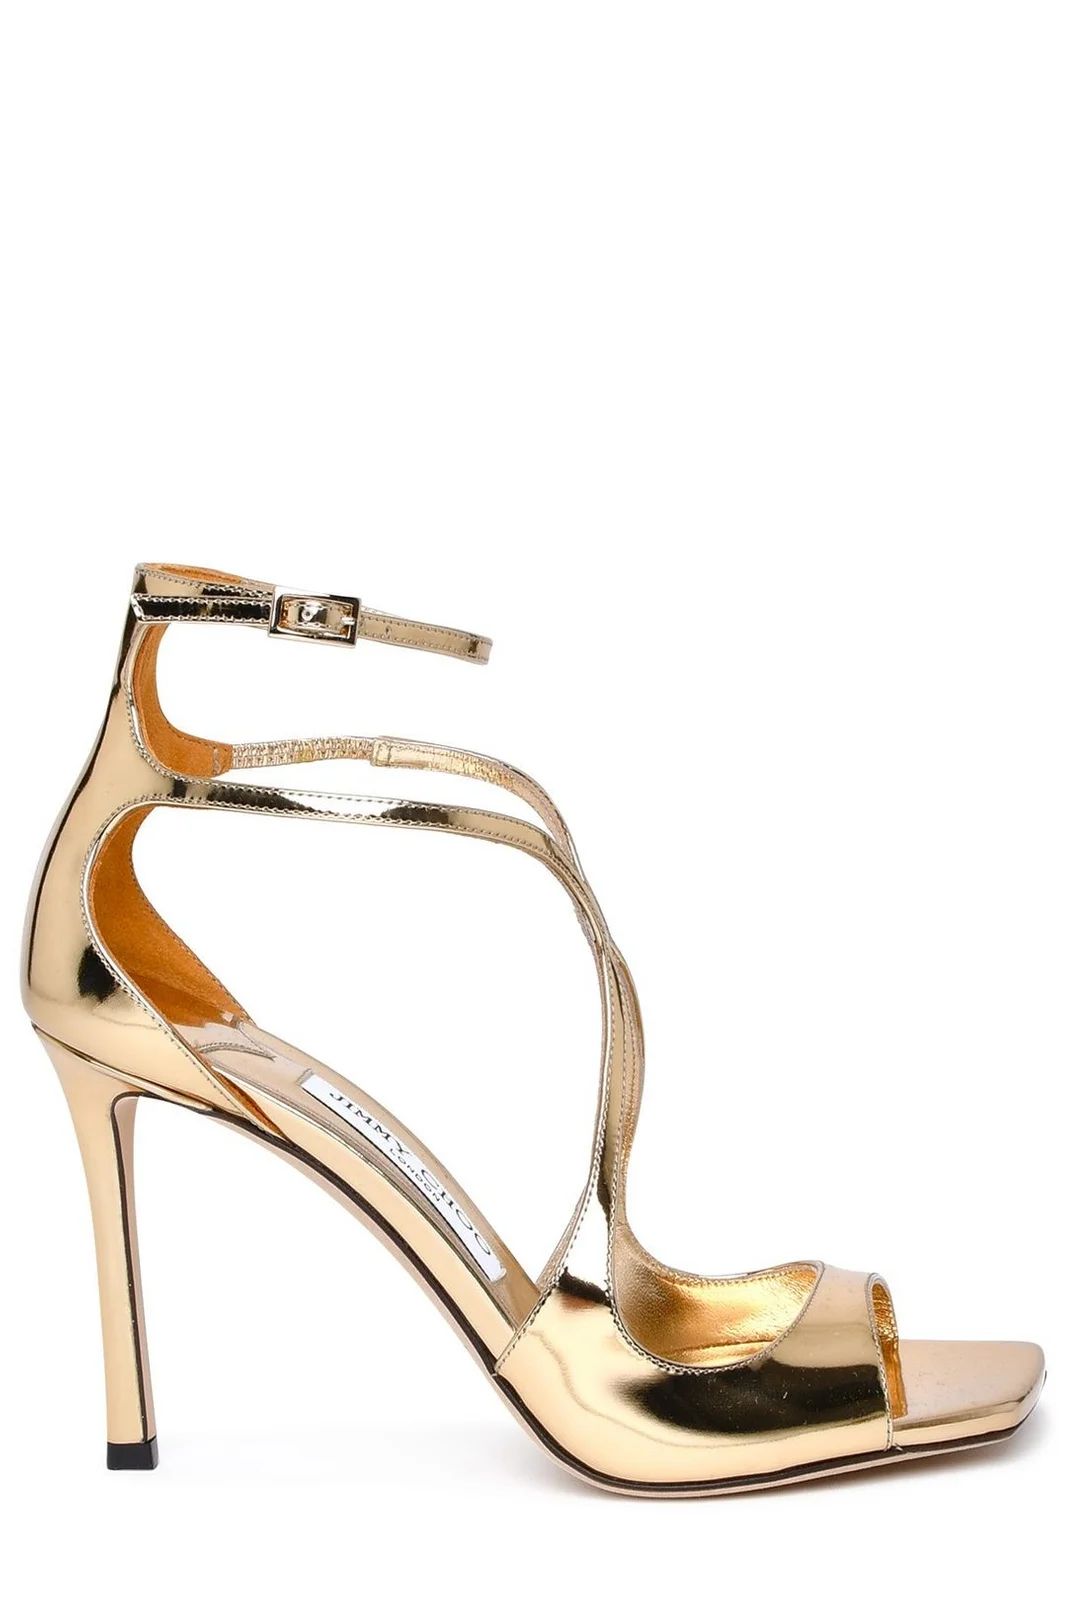 Jimmy Choo Azia 95 Ankle Strapped Sandals | Cettire Global